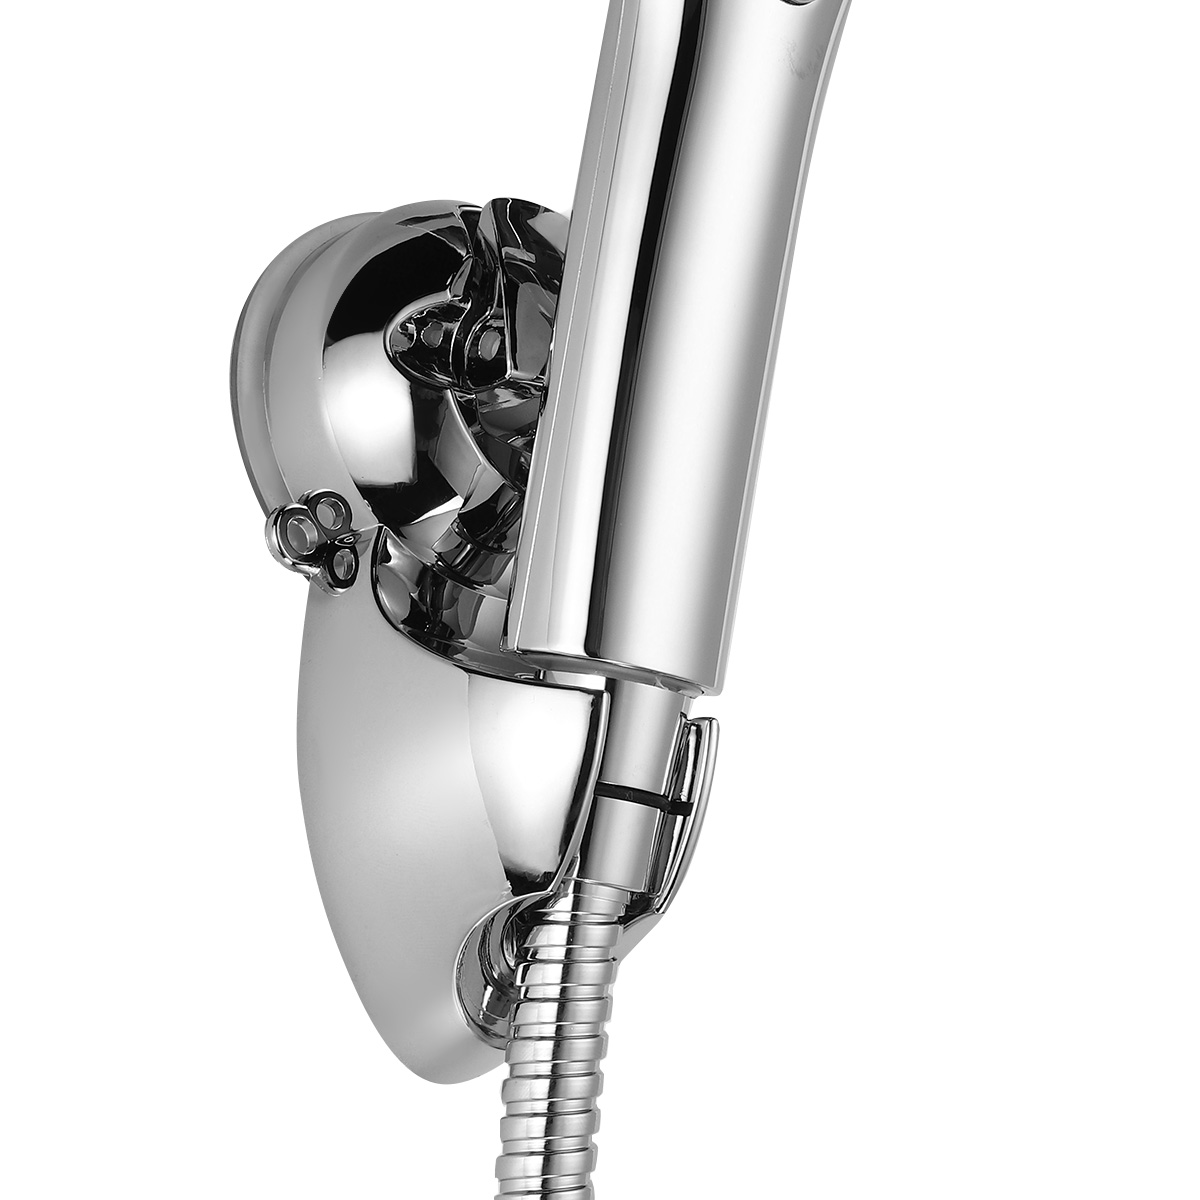 5-in-1-Rainfall-Handheld-Shower-Head-Combo-3-Level-Adjustable-Dual-Square-Hose-1825049-10